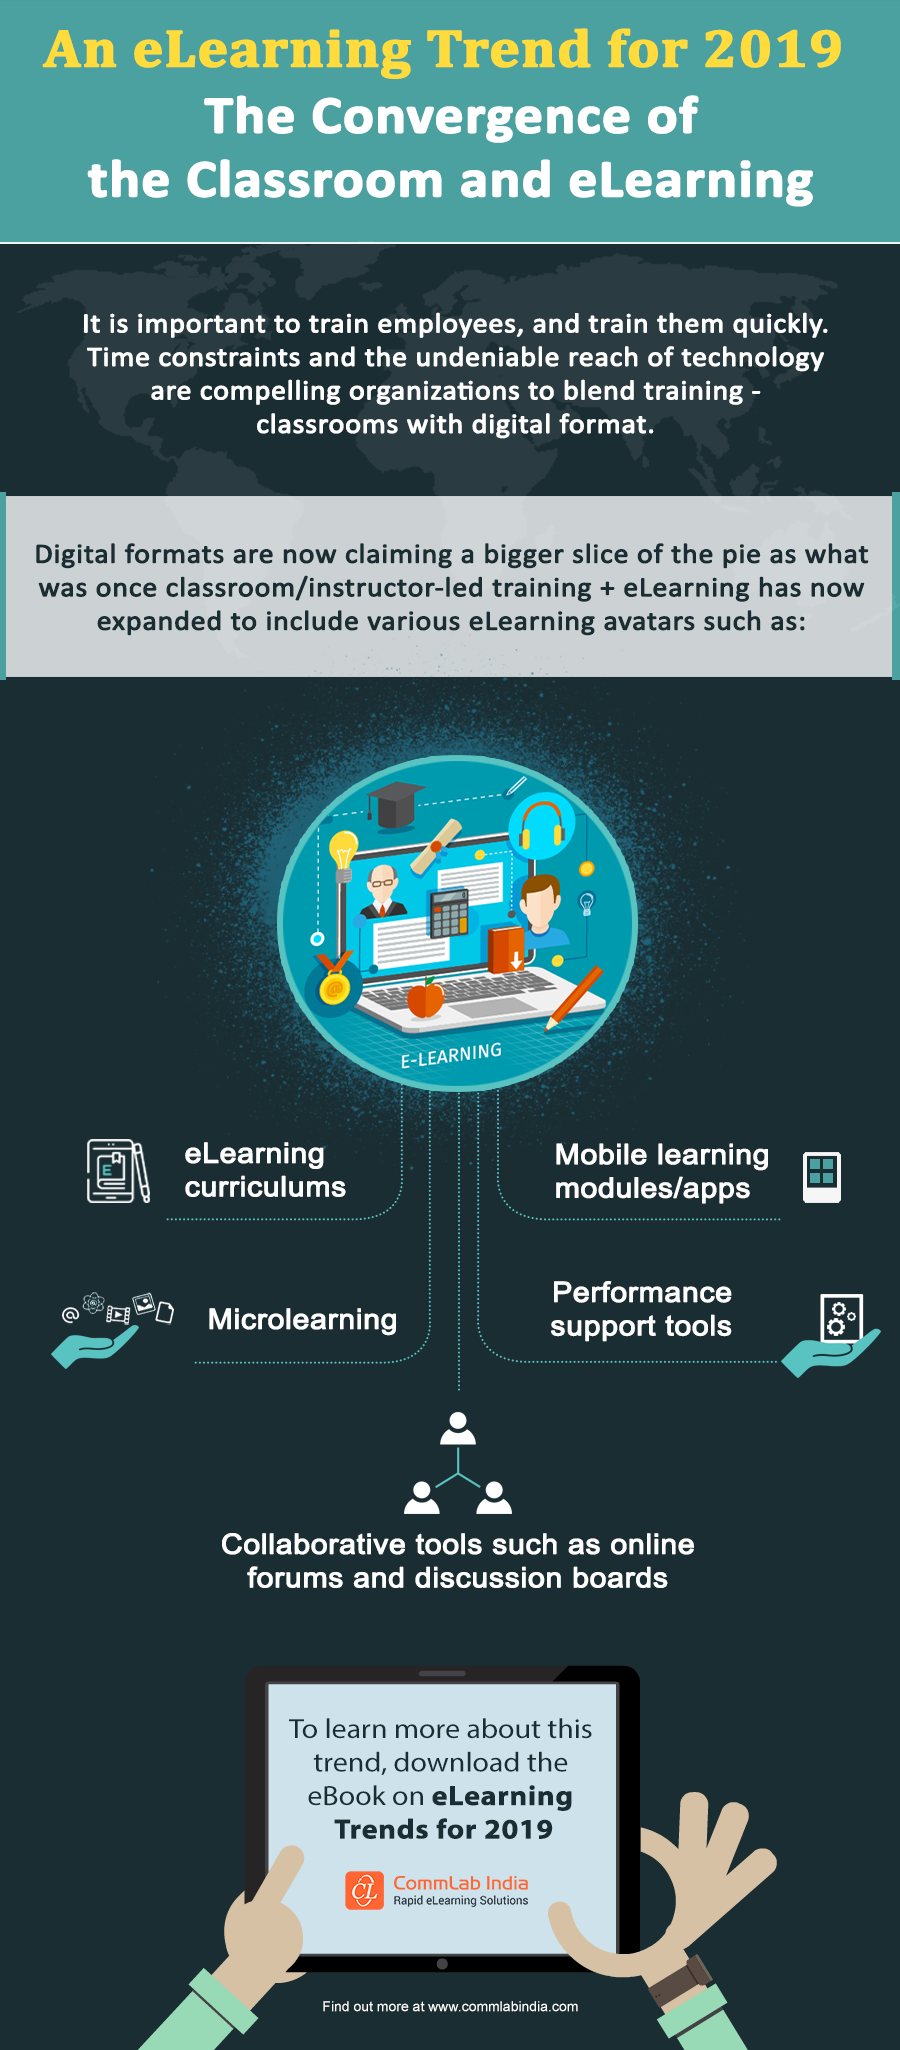 An eLearning Trend for 2019: The Convergence of the Classroom and eLearning [Infographic]